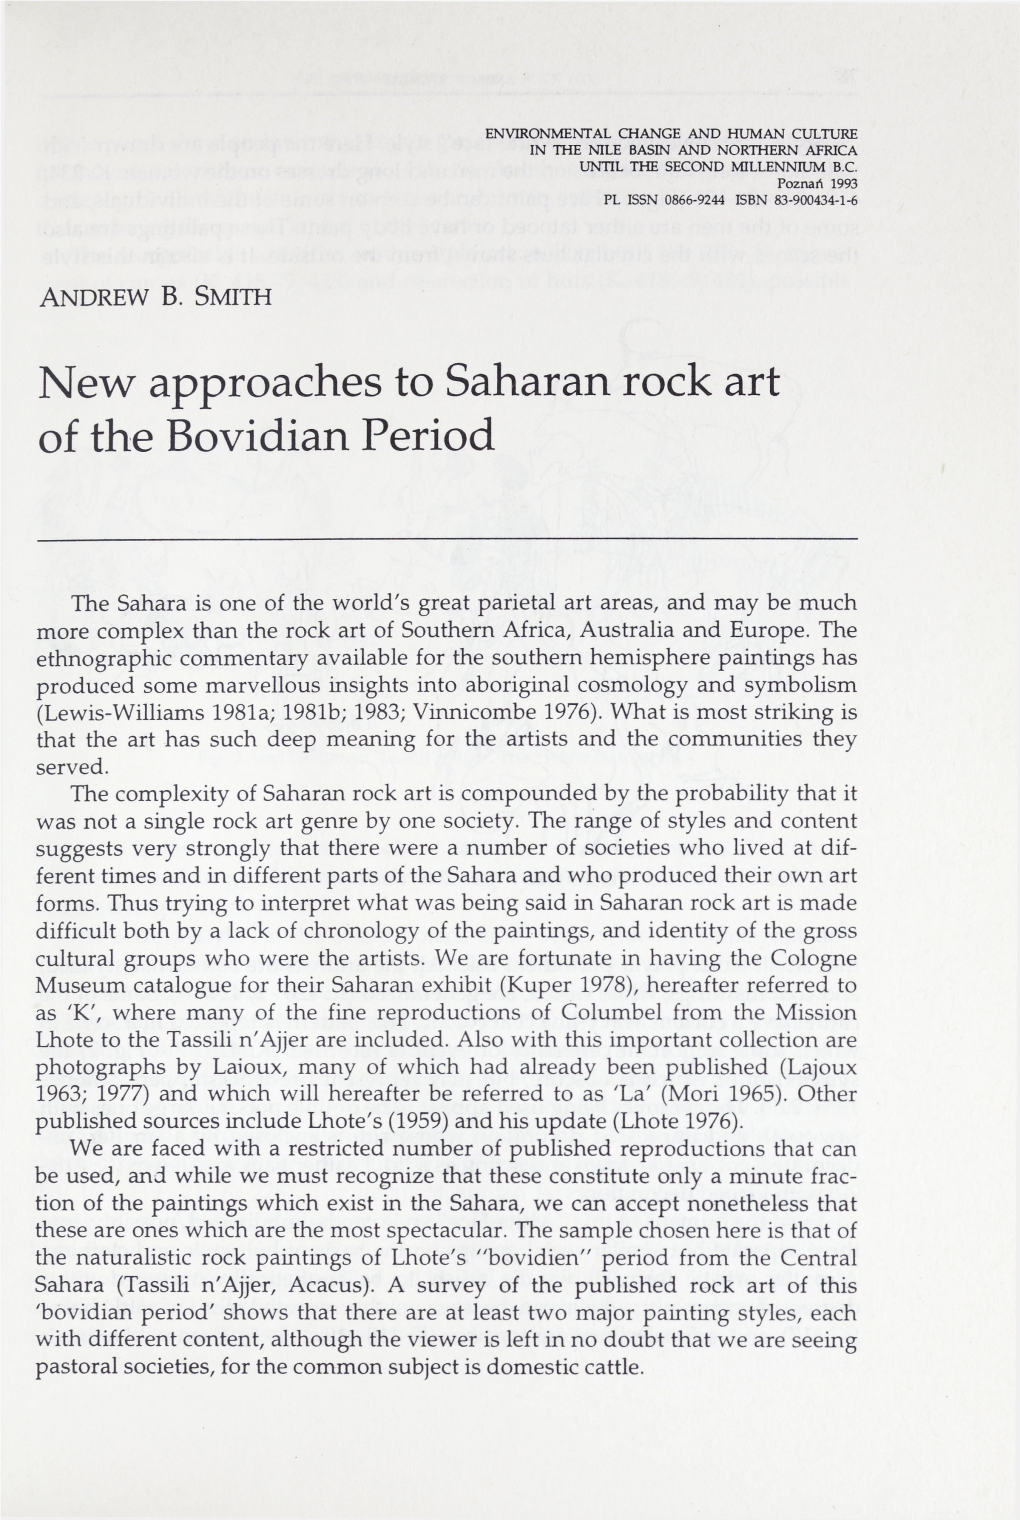 New Approaches to Saharan Rock Art of the Bovidian Period